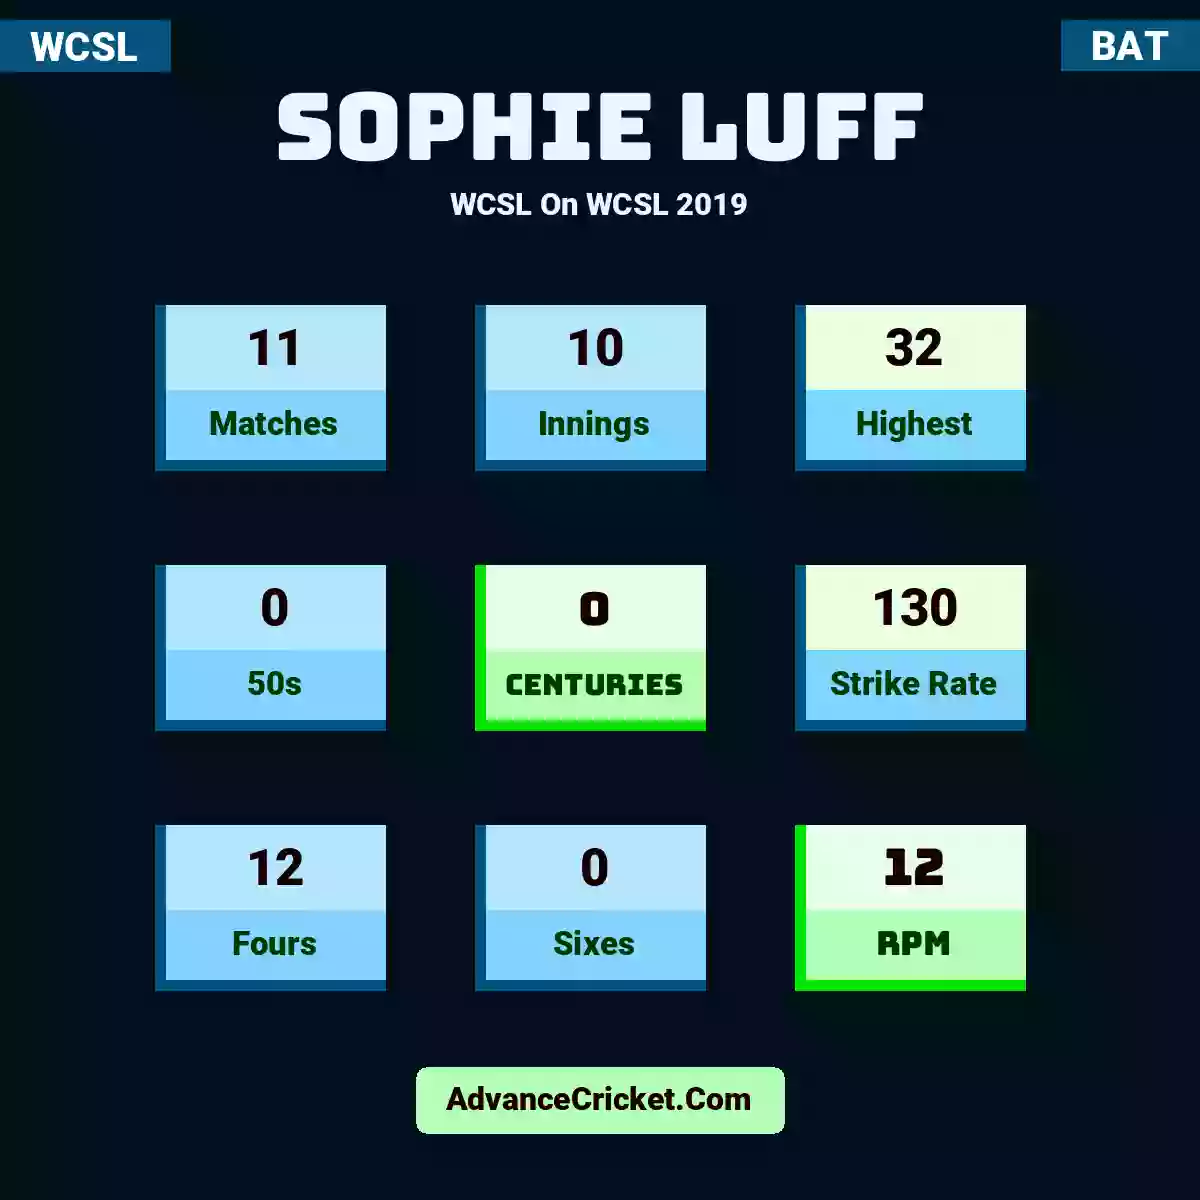 Sophie Luff WCSL  On WCSL 2019, Sophie Luff played 11 matches, scored 32 runs as highest, 0 half-centuries, and 0 centuries, with a strike rate of 130. S.Luff hit 12 fours and 0 sixes, with an RPM of 12.